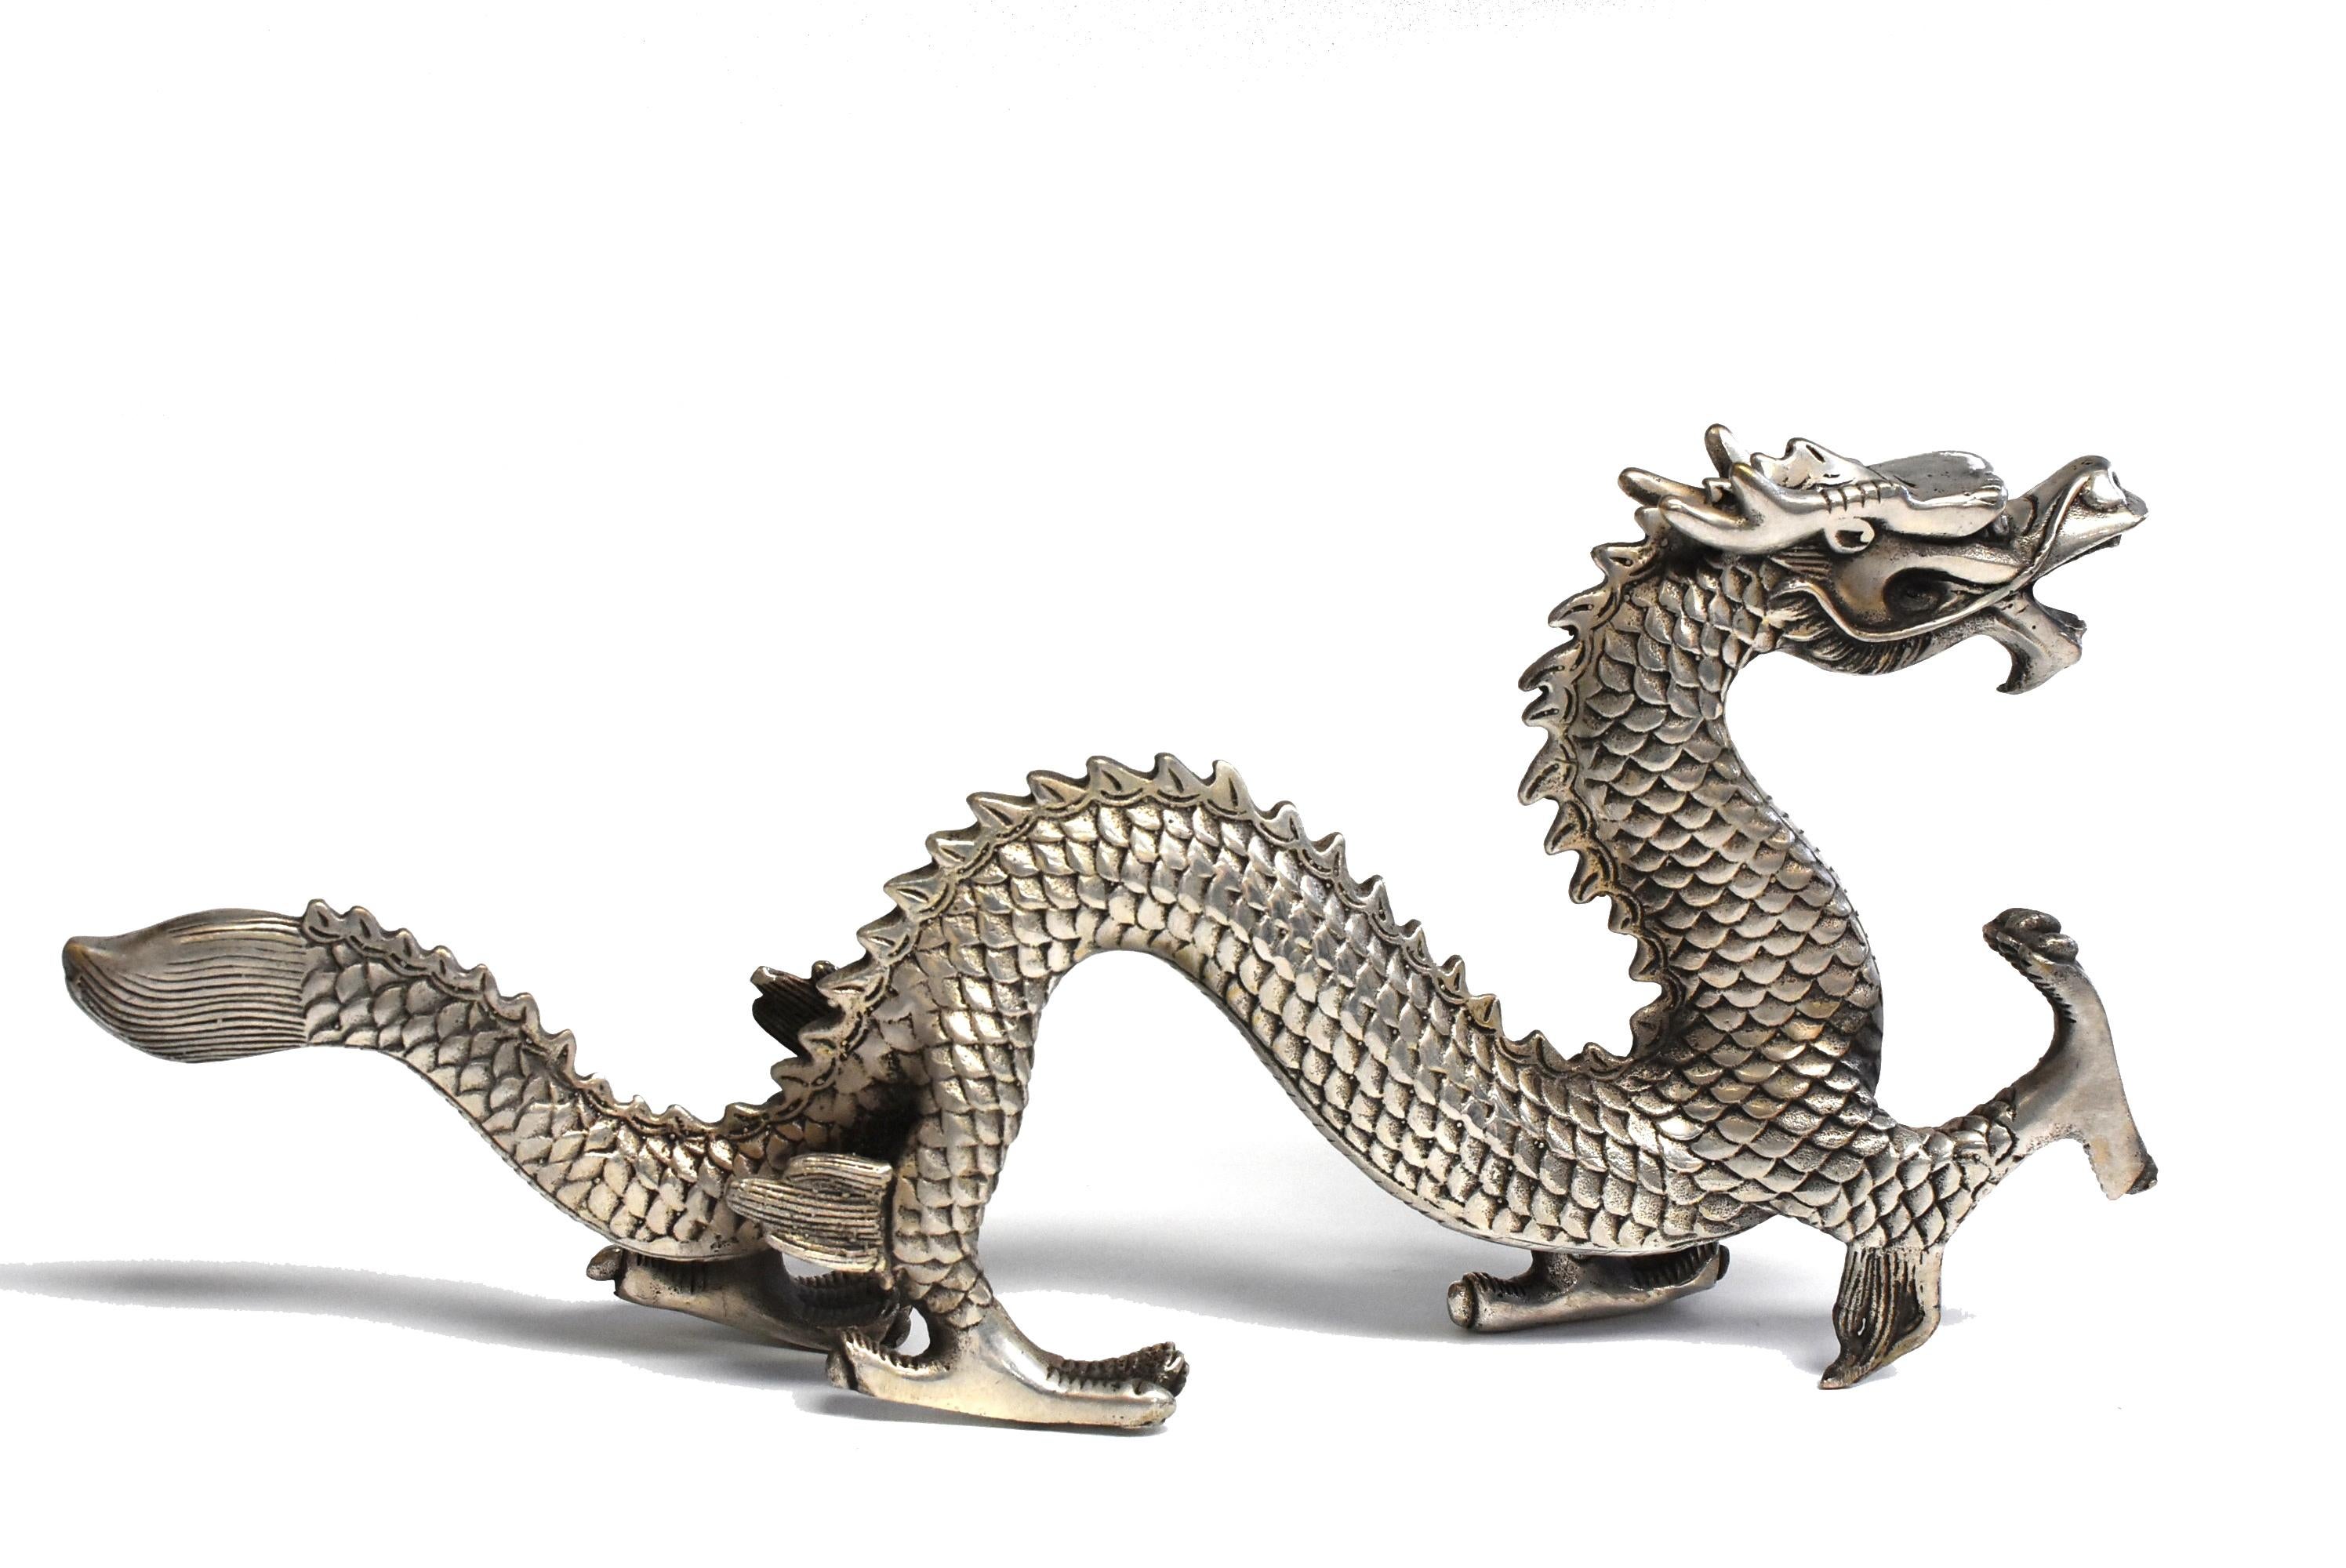 This model of dragon is a fine example of animal sculptures in the late Qing dynasty style. The four-clawed dragon has one front talon in pursuit of its subject, likely a flaming pearl, while the other three are firmly planted on the ground. The